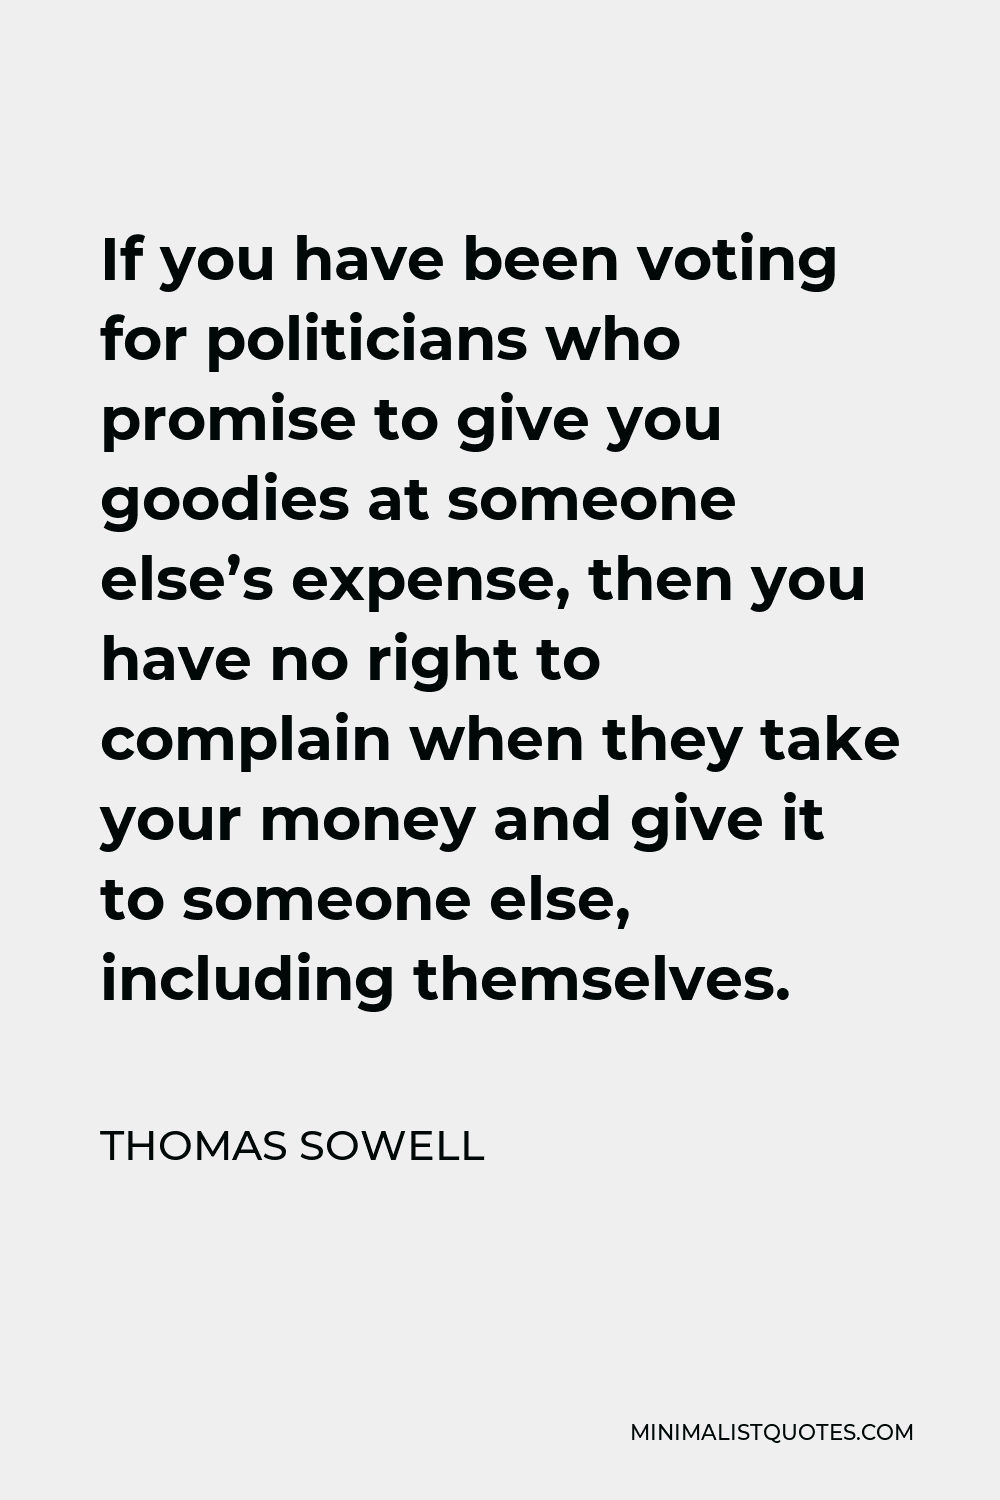 Thomas Sowell Quote - If you have been voting for politicians who promise to give you goodies at someone else’s expense, then you have no right to complain when they take your money and give it to someone else, including themselves.